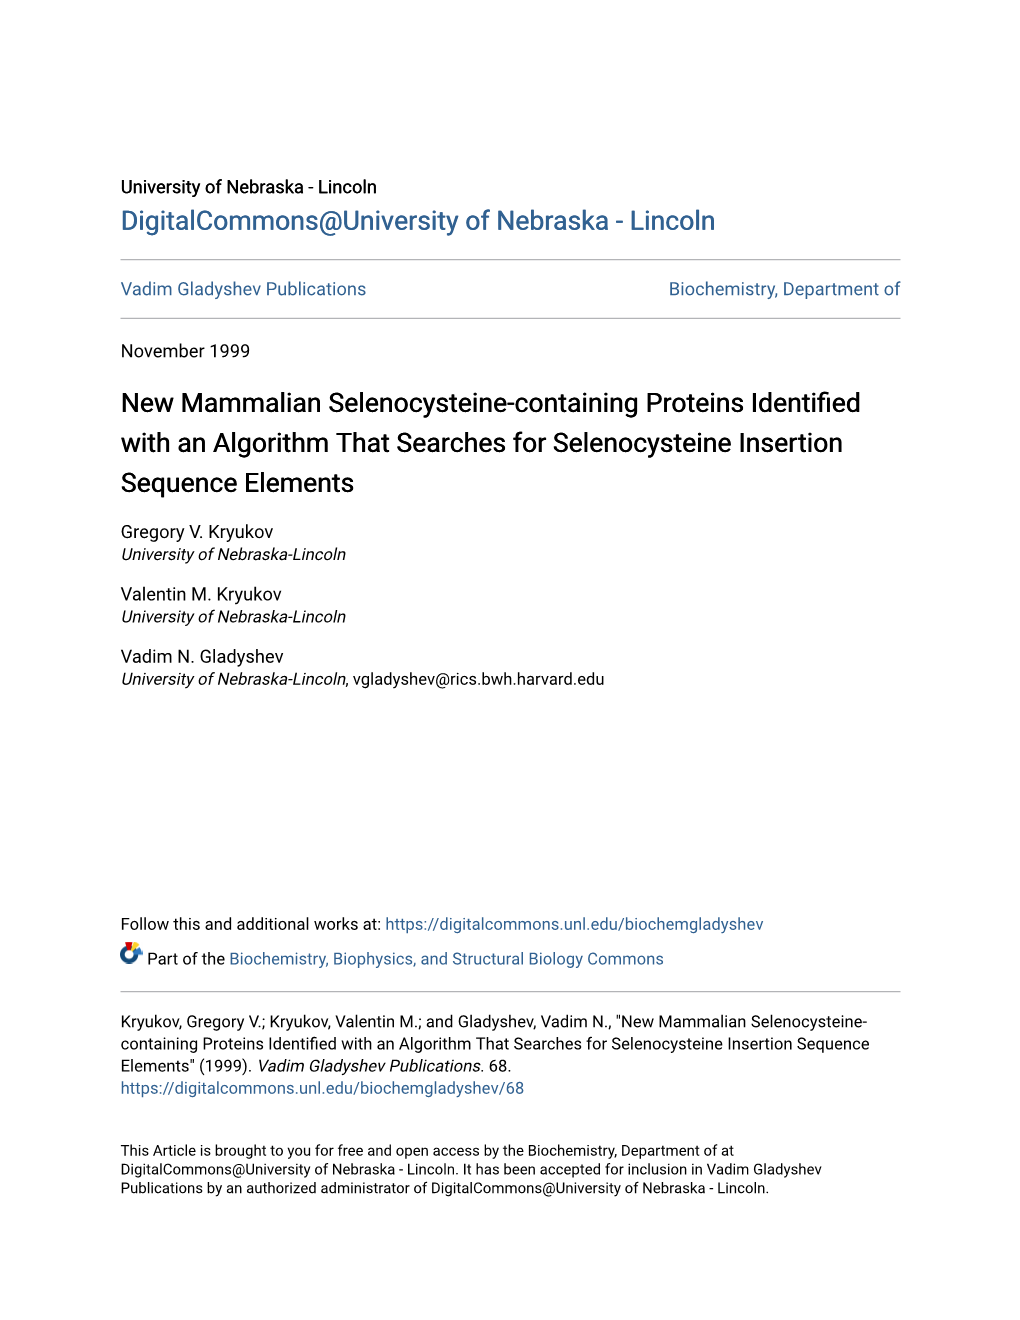 New Mammalian Selenocysteine-Containing Proteins Identified with an Algorithm That Searches for Selenocysteine Insertion Sequence Elements